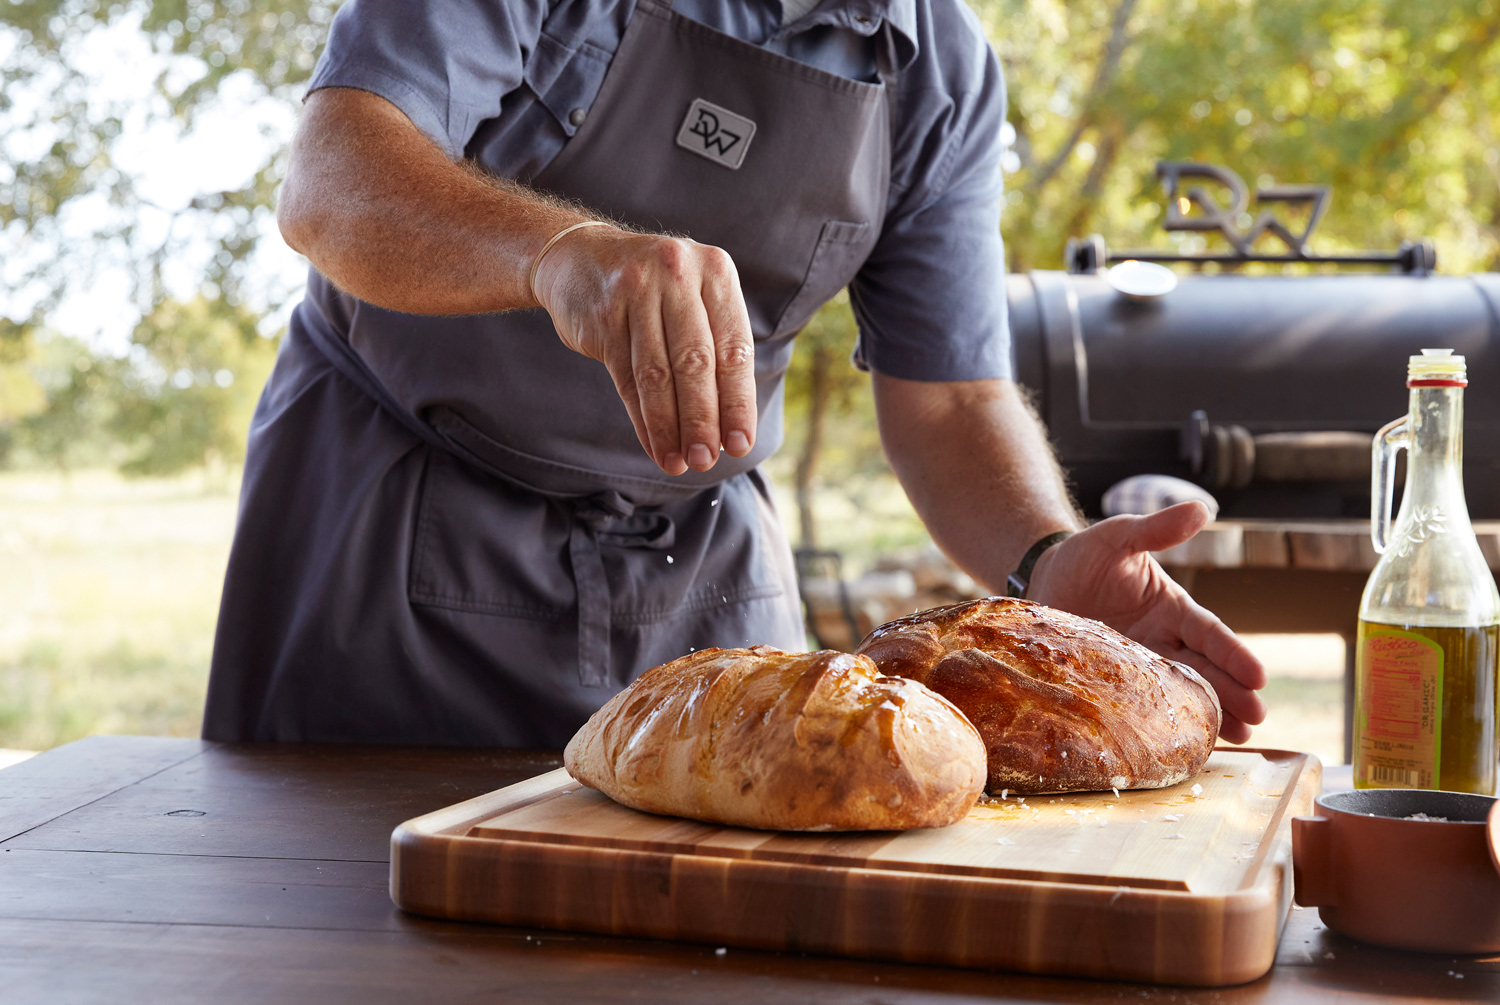 Driftwood Golf Club shoot of chef making bread outdoors by lifestyle photographer Buff Strickland